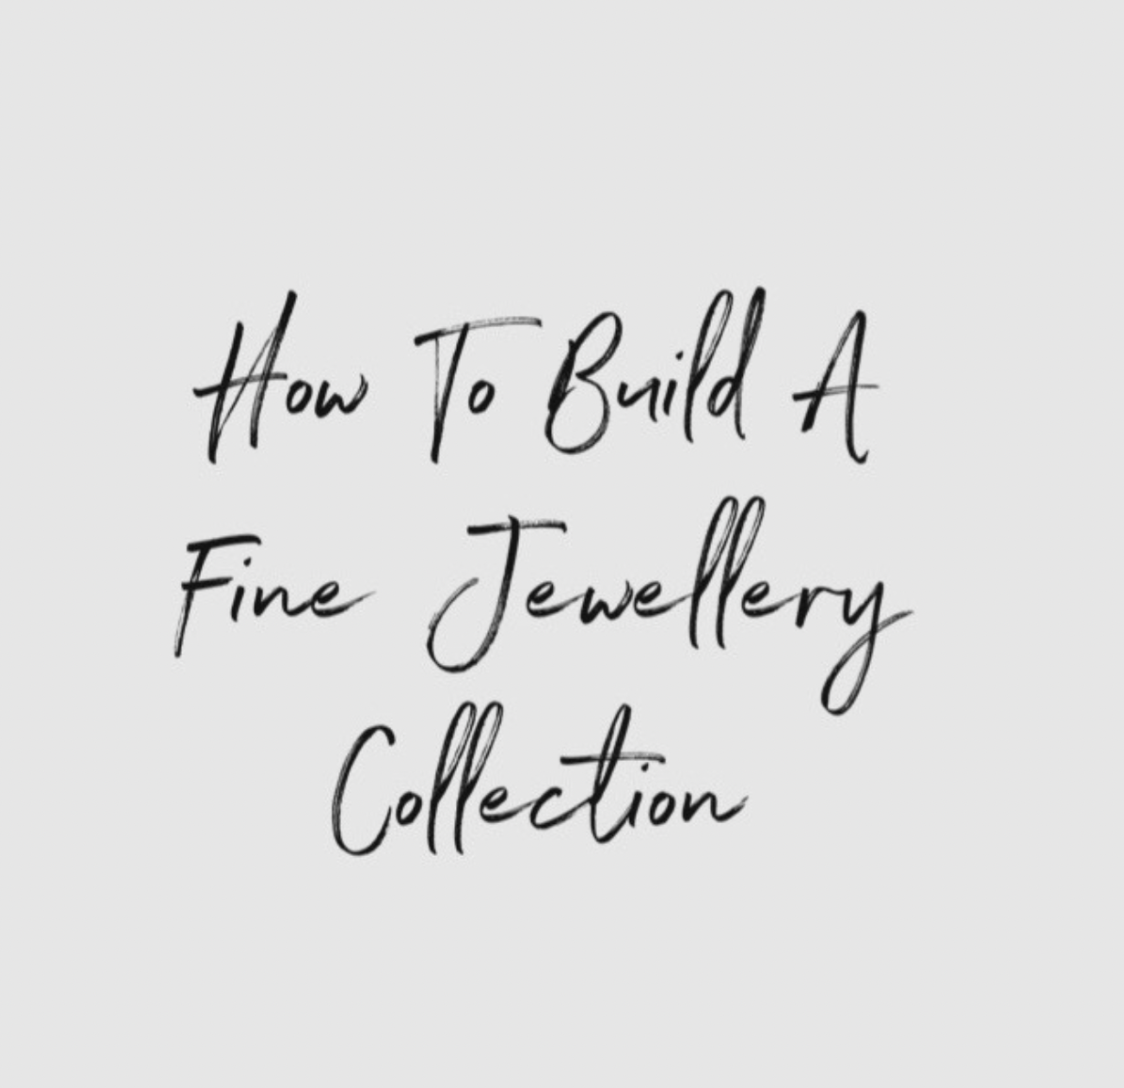 HOW TO BUILD YOUR OWN FINE JEWELLERY COLLECTION